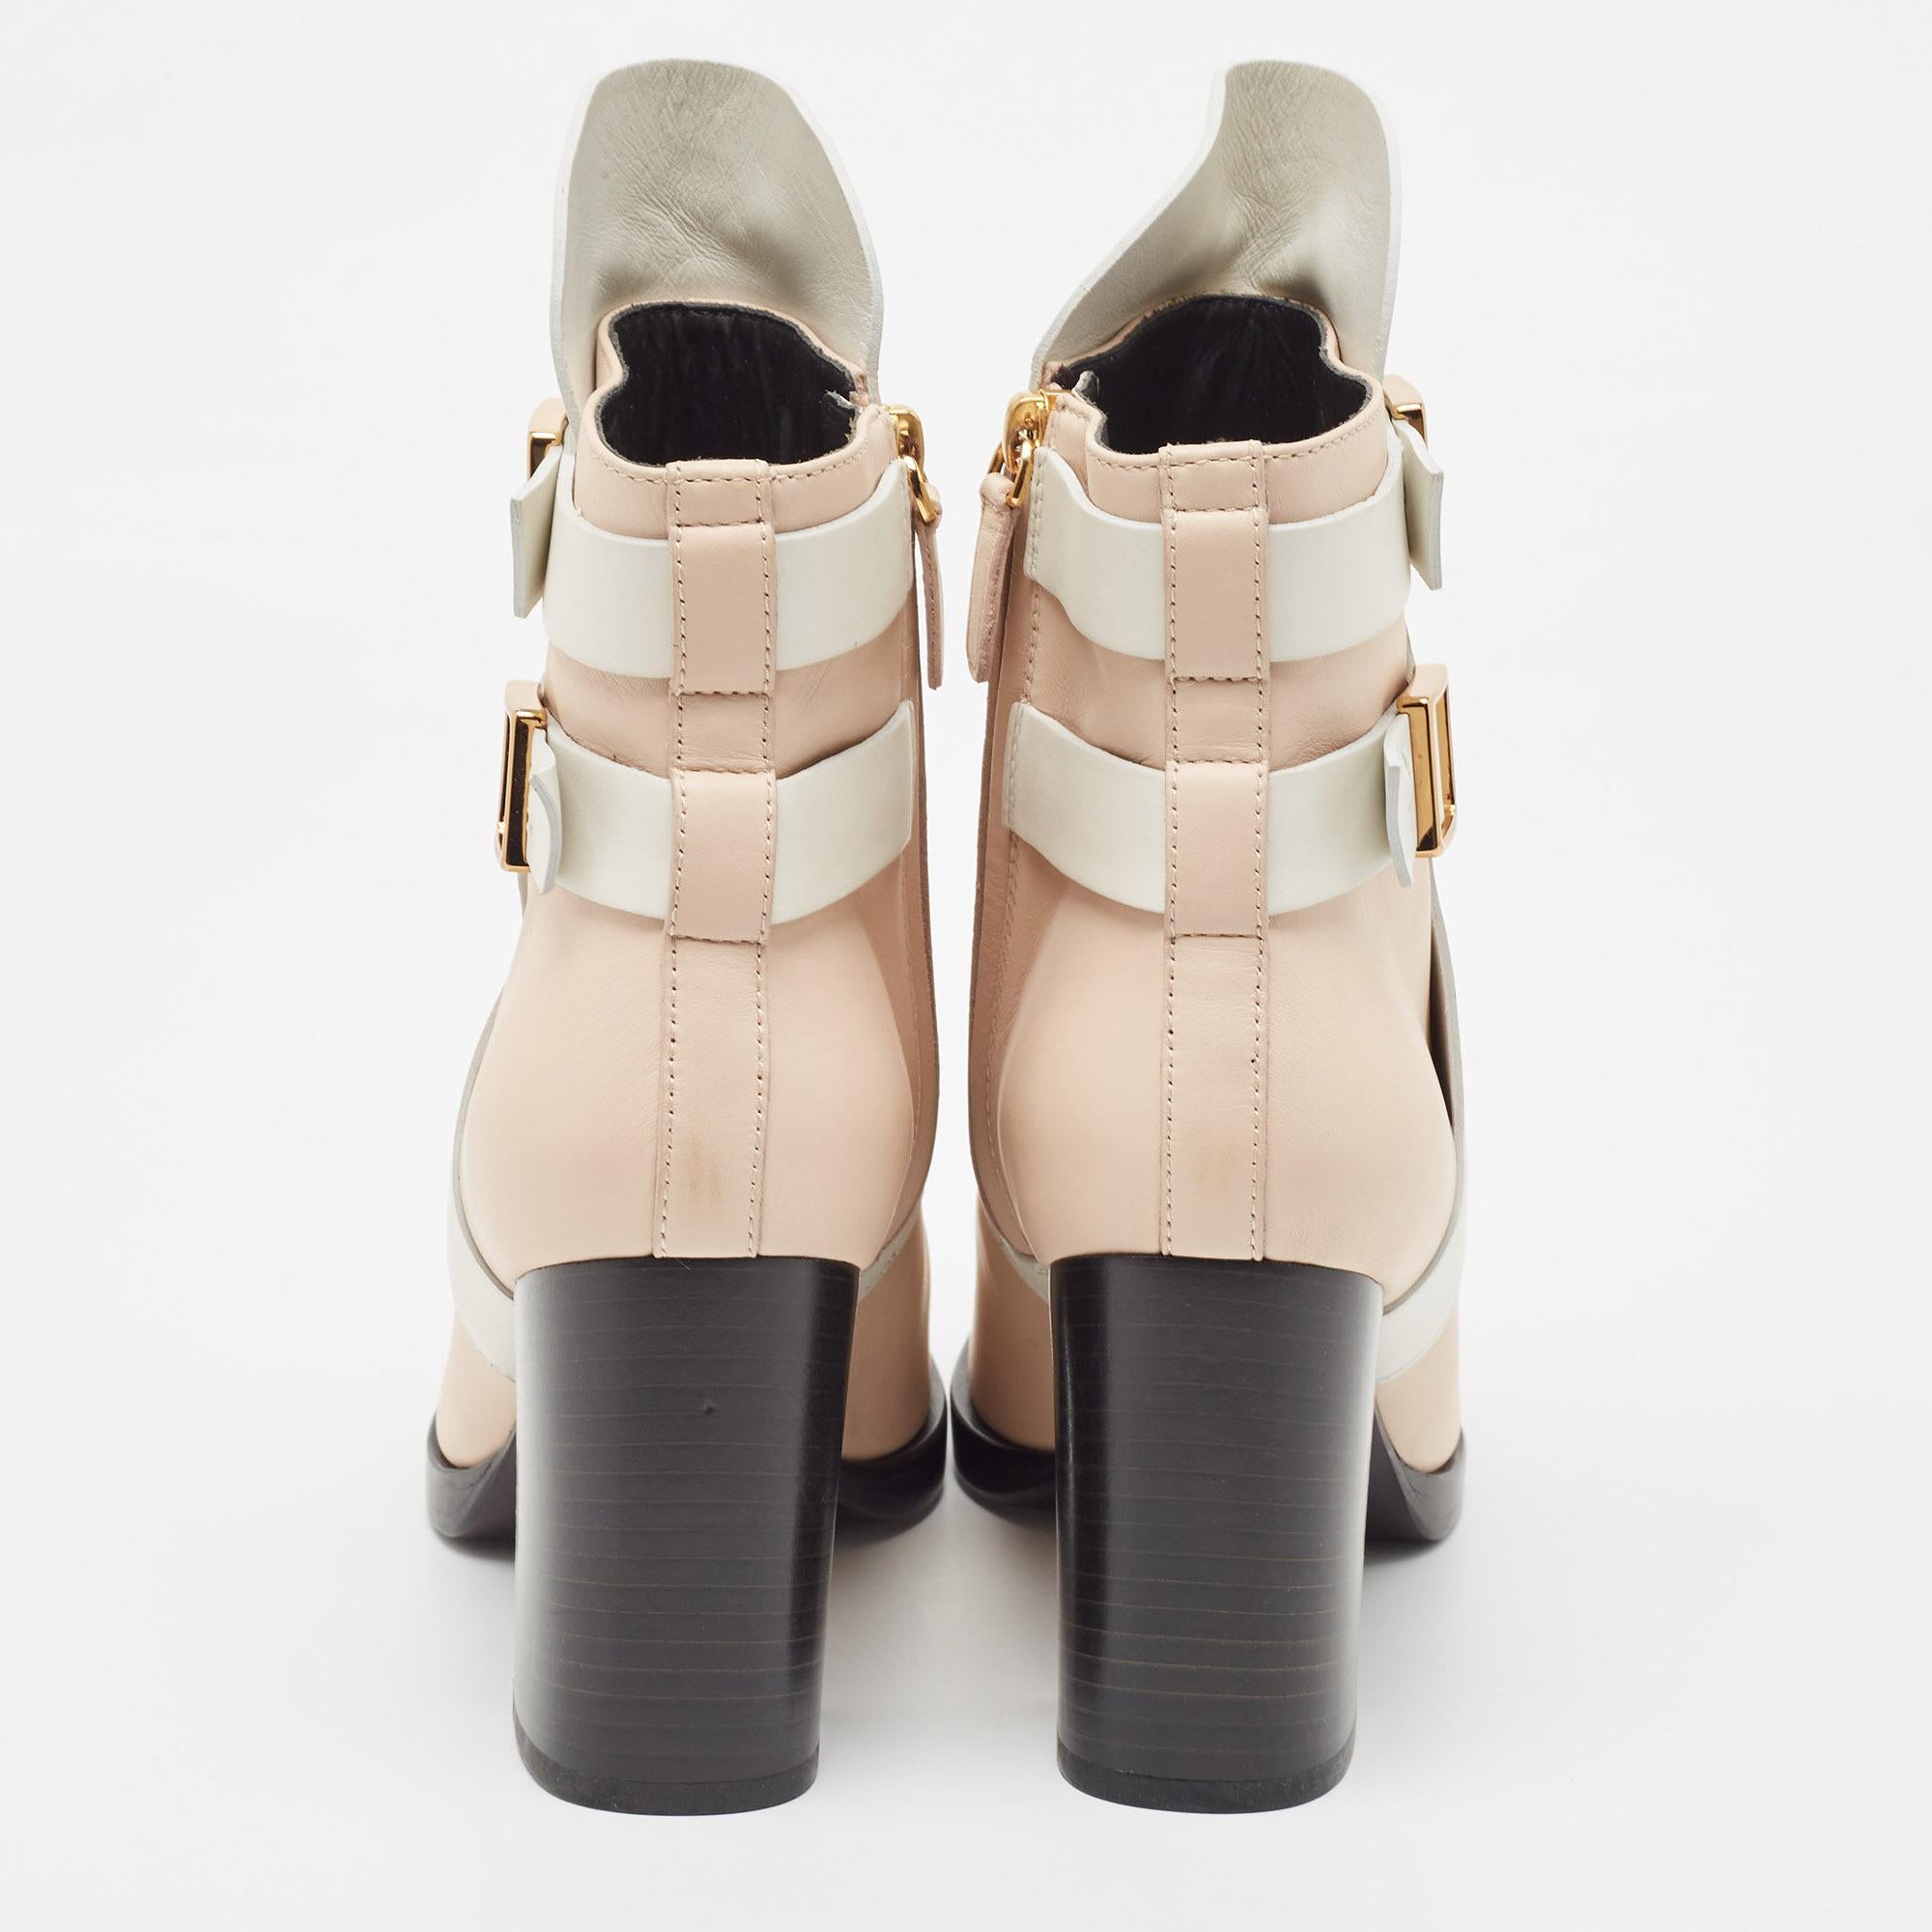 Tod's White/Beige Leather Buckle Detail Block Heel Ankle Boots Size 38.5 In Excellent Condition For Sale In Dubai, Al Qouz 2